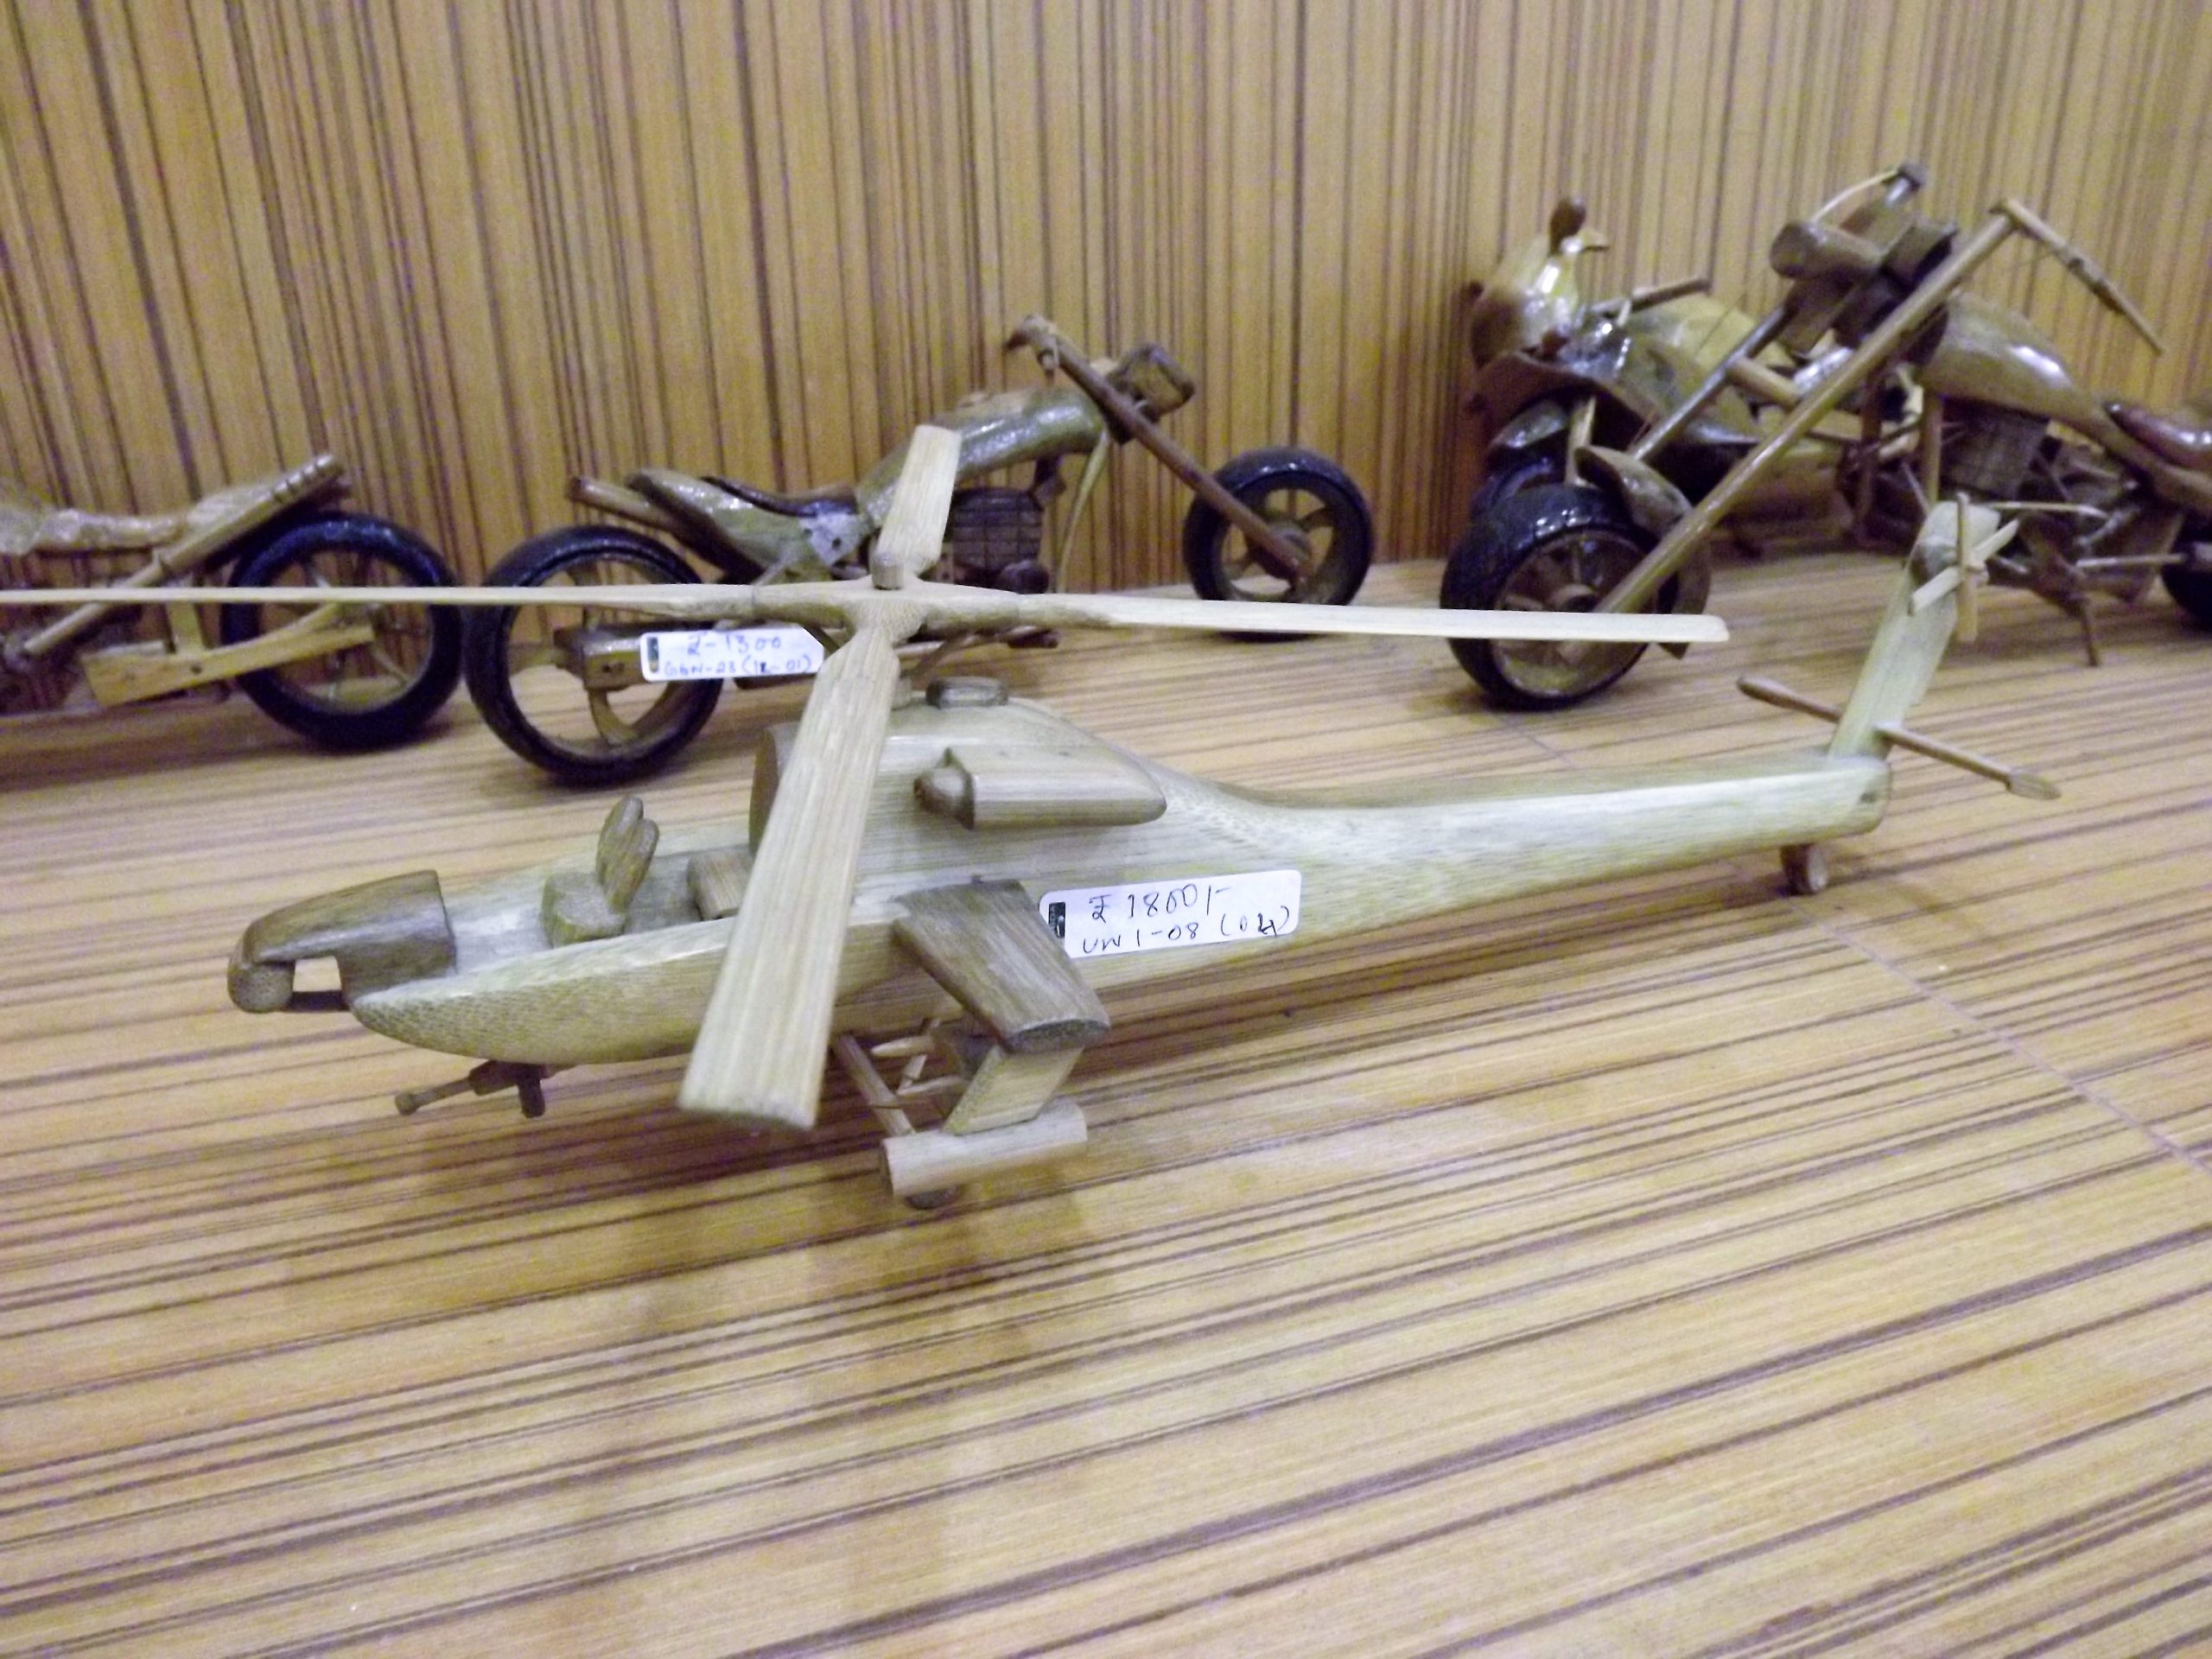 Miniatures of helicopter and bikes